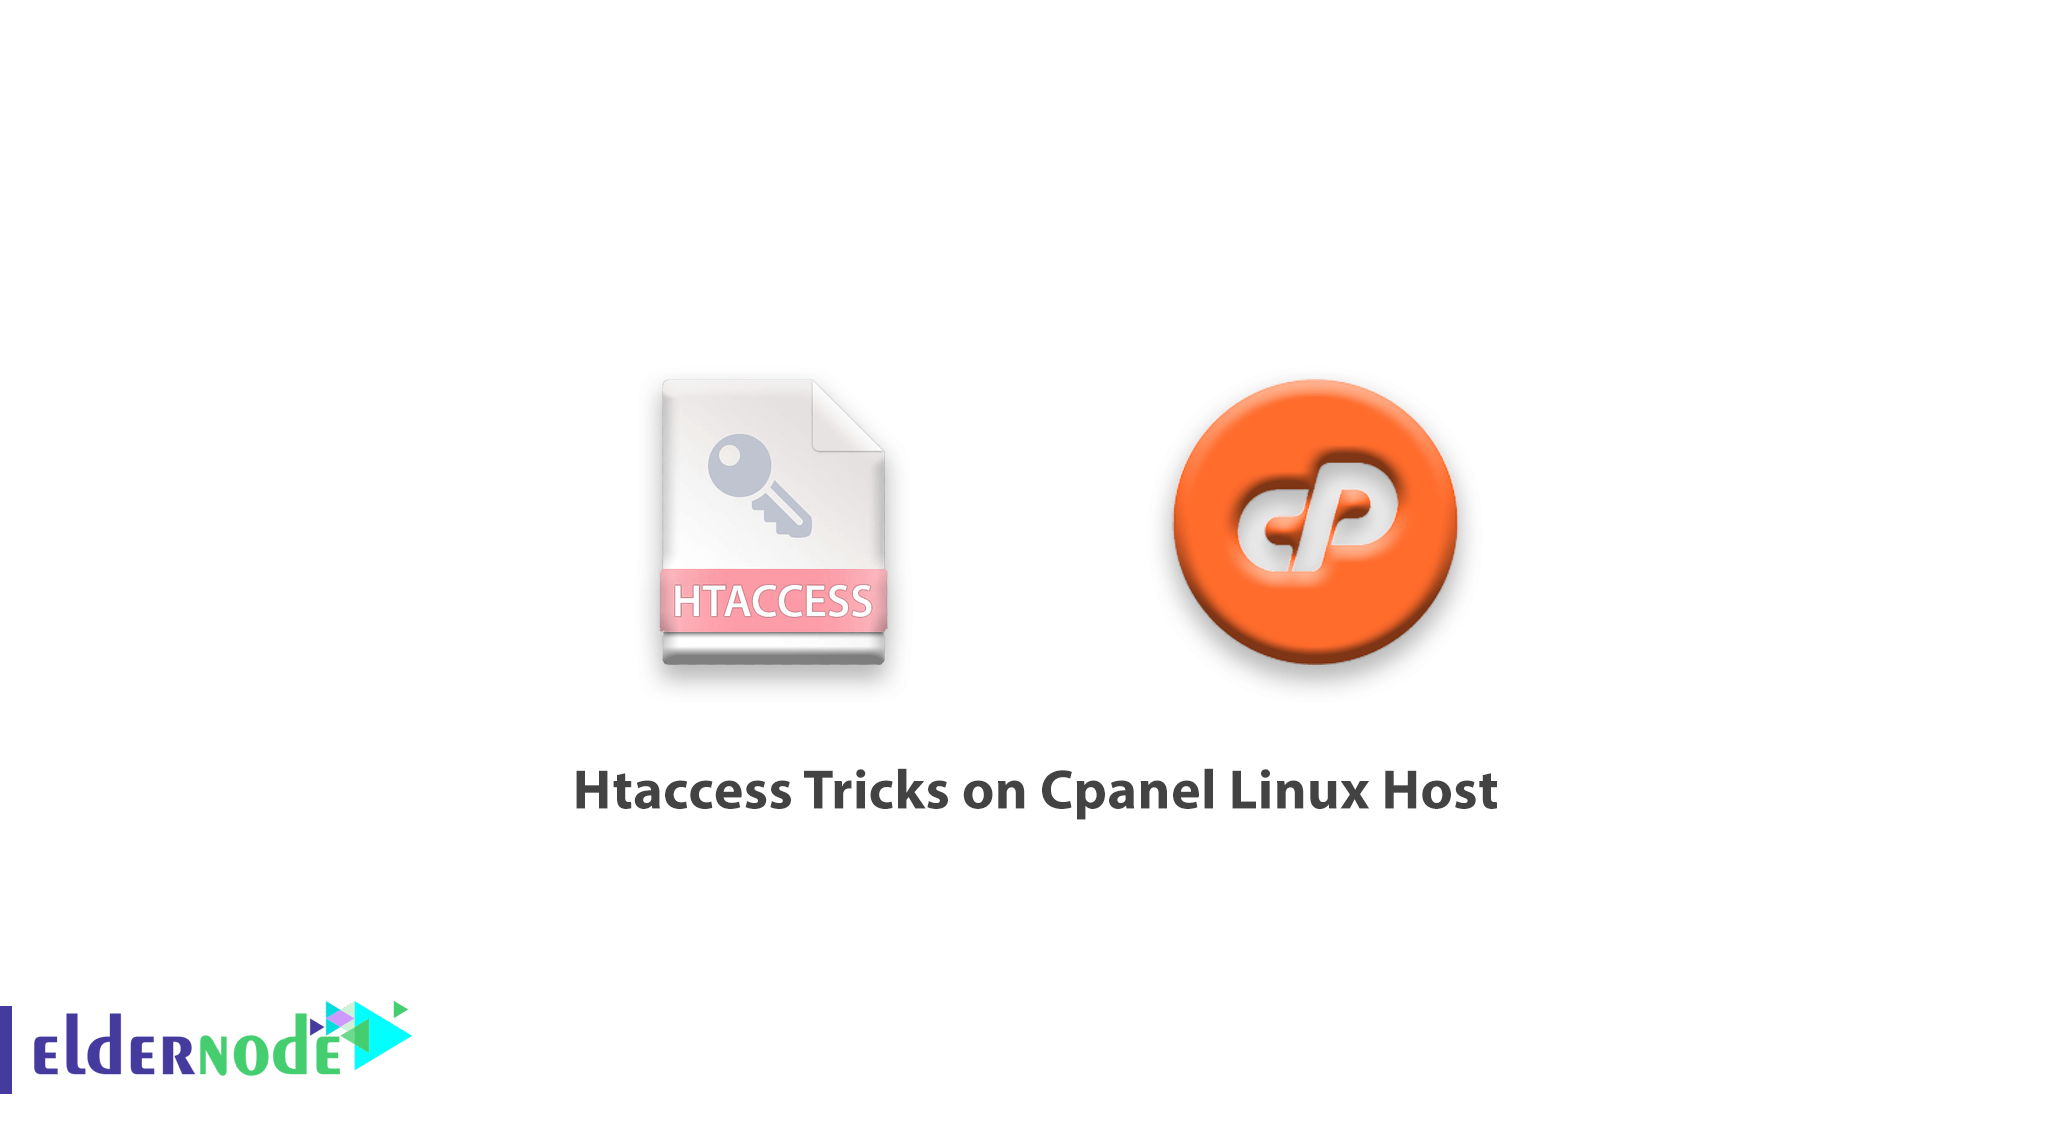 Htaccess Tricks on Cpanel Linux Host